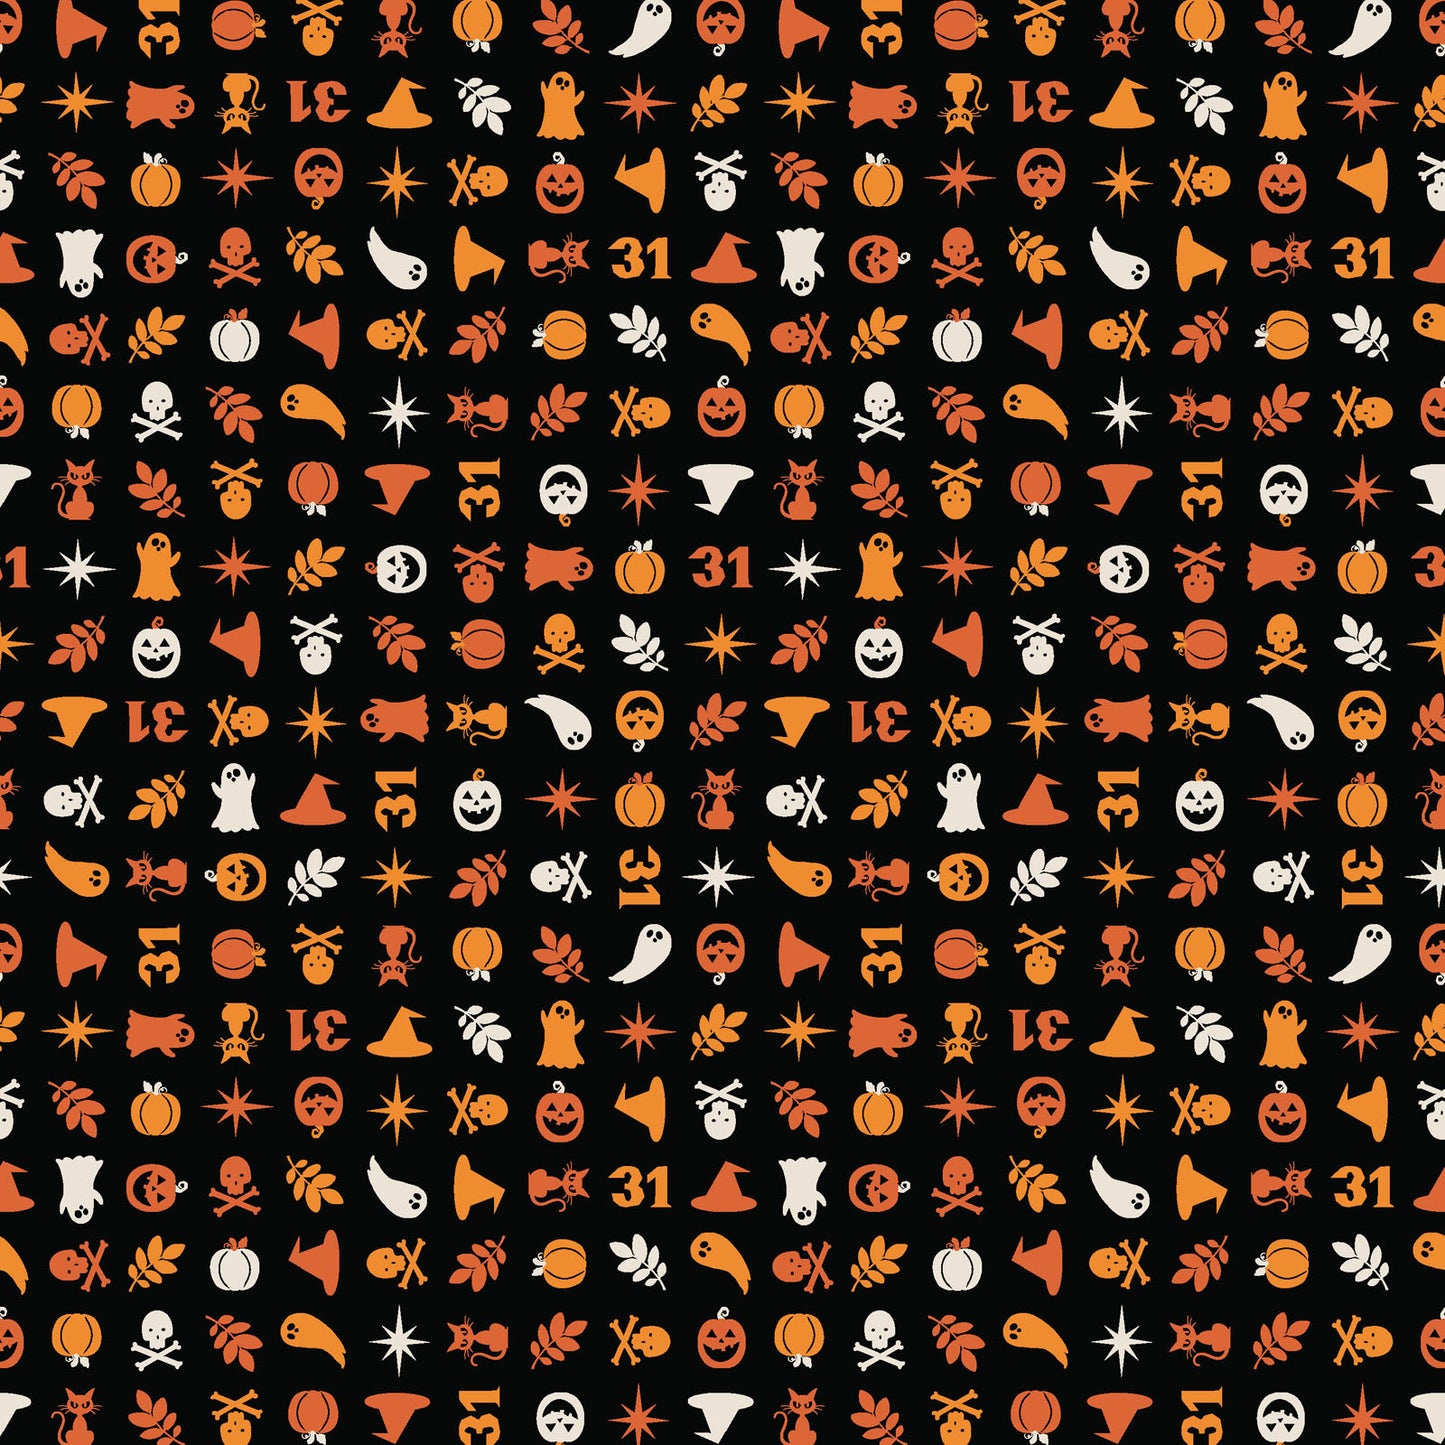 The Halloween Charms print in black (MAS10573-J) from the Pumpkin and Potions line by Kimberbell for Maywood Studio features pumpkins, witch hats, ghosts, cats, spiders and more. Photo shows details of the designs.